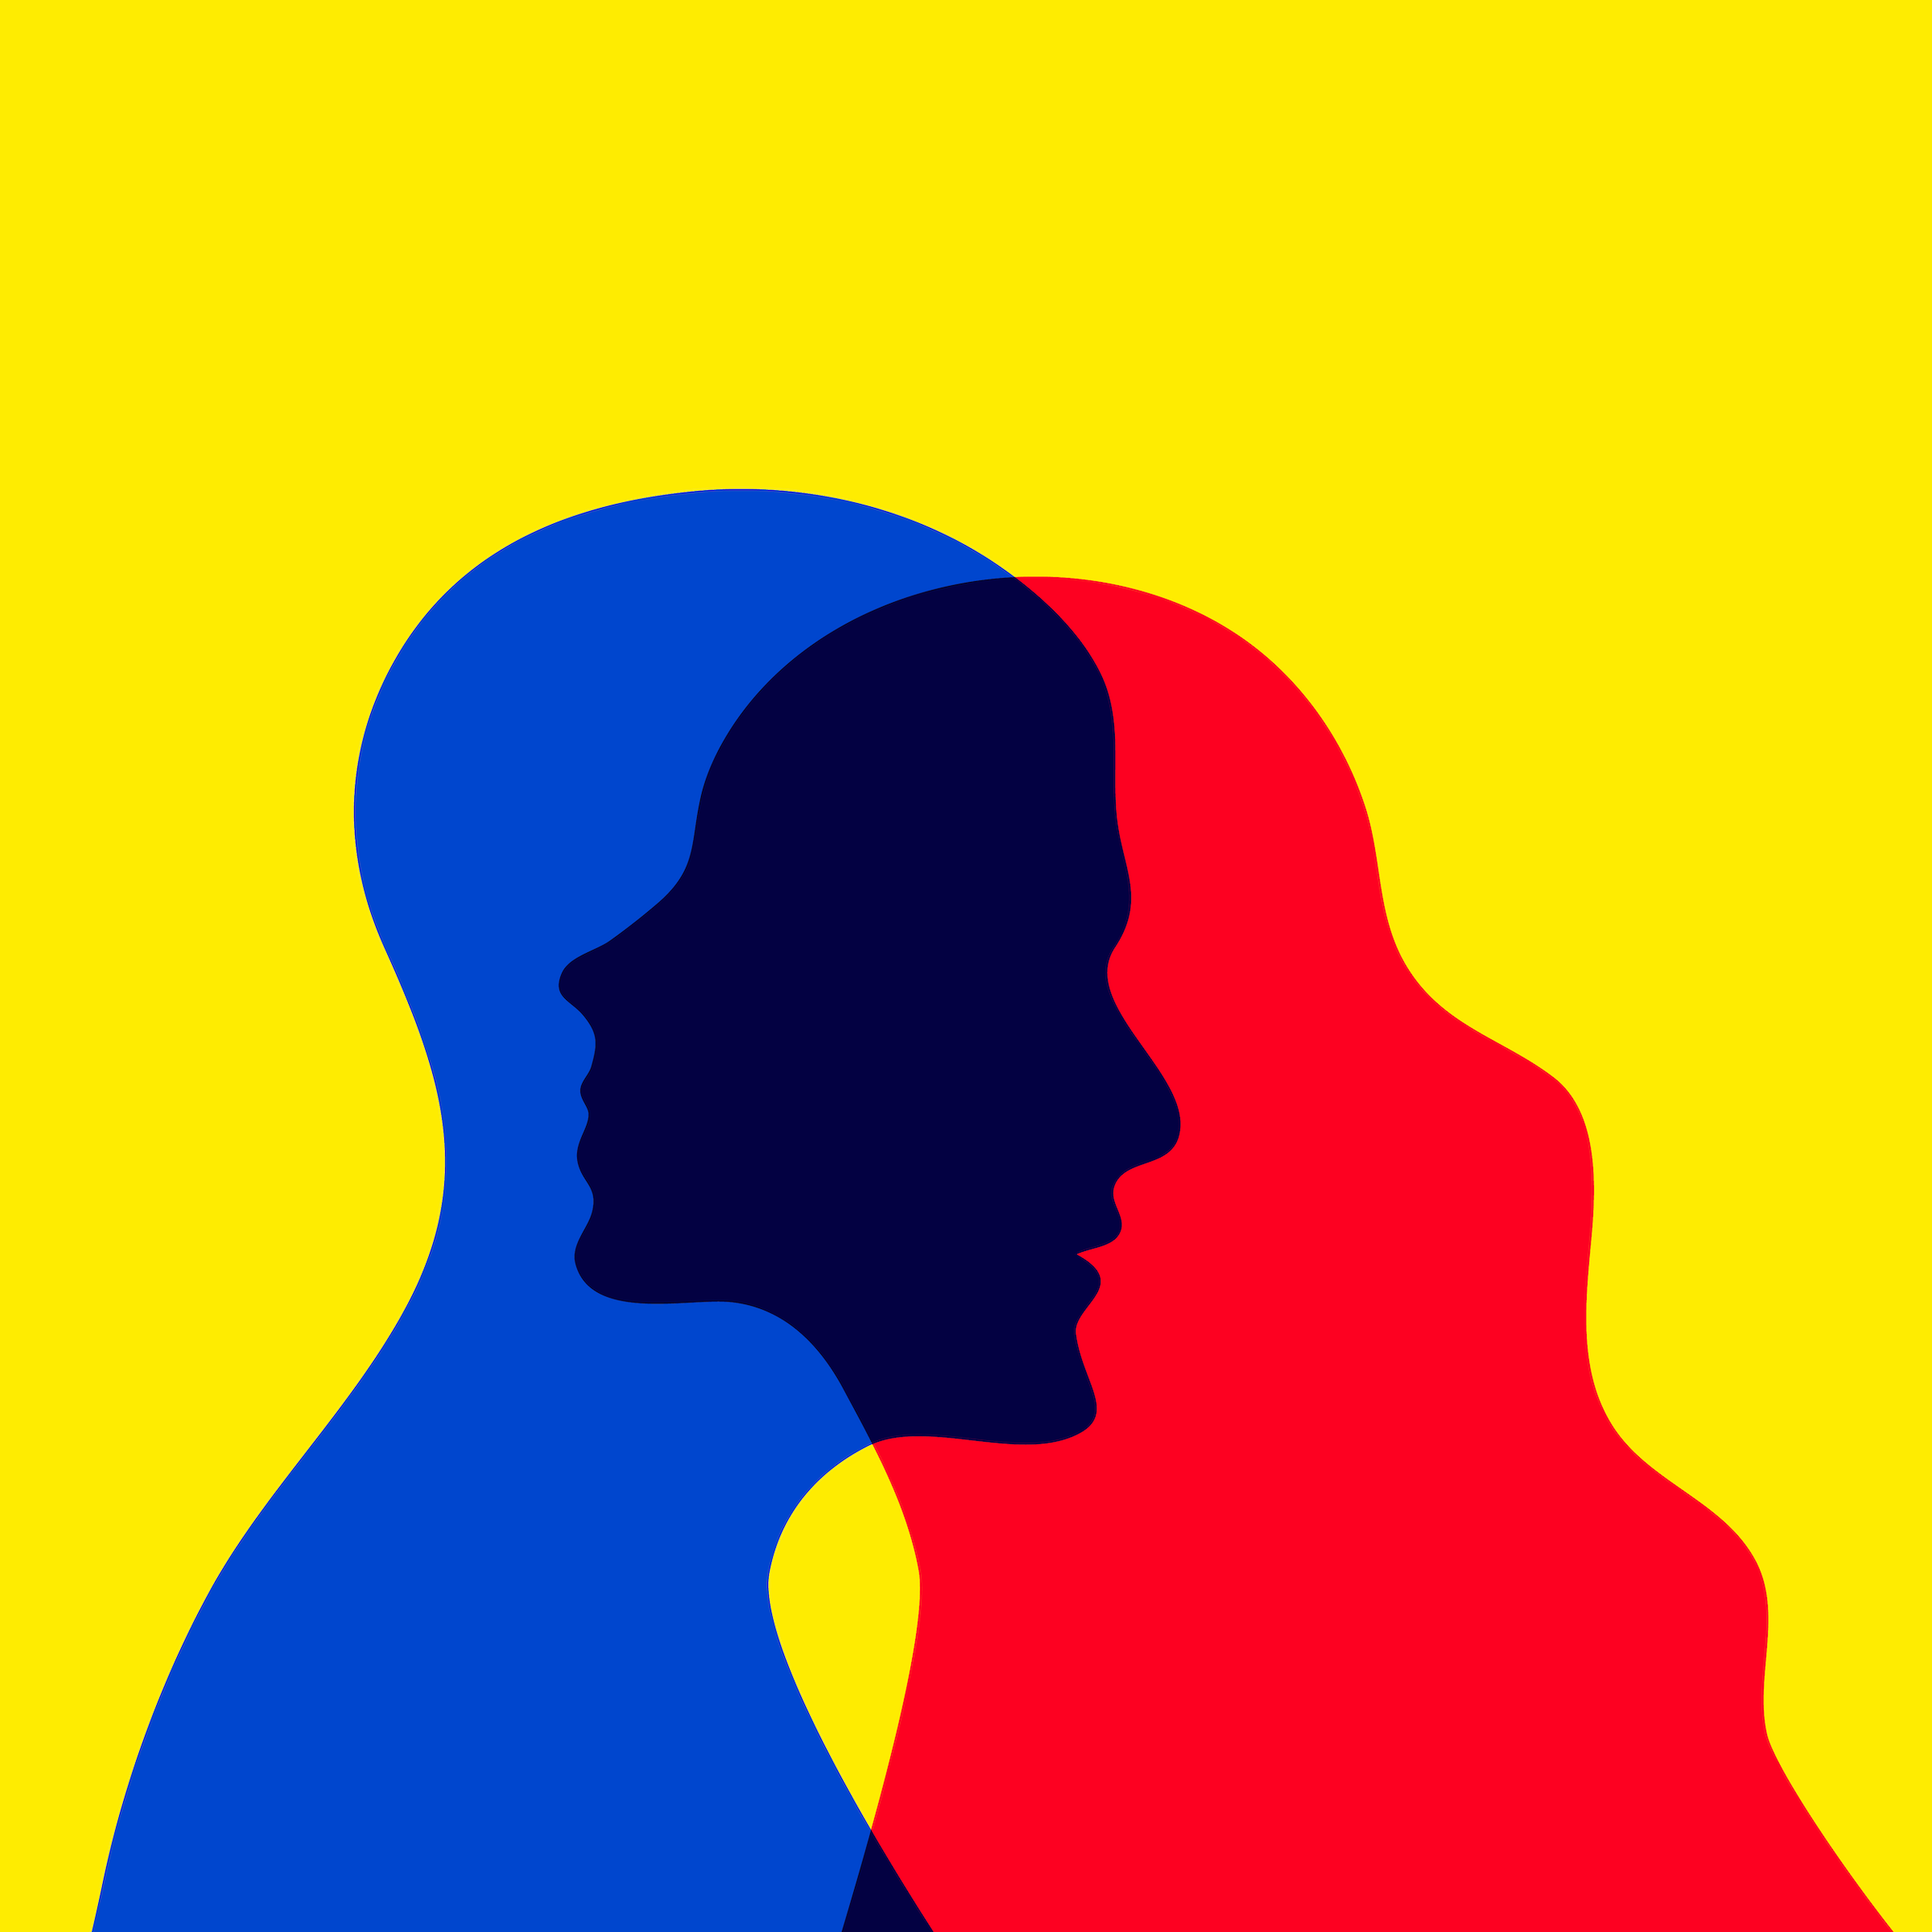 A blue silhouette of a bald person overlapping a red silhouette of a long-haired person, all on a yellow background.